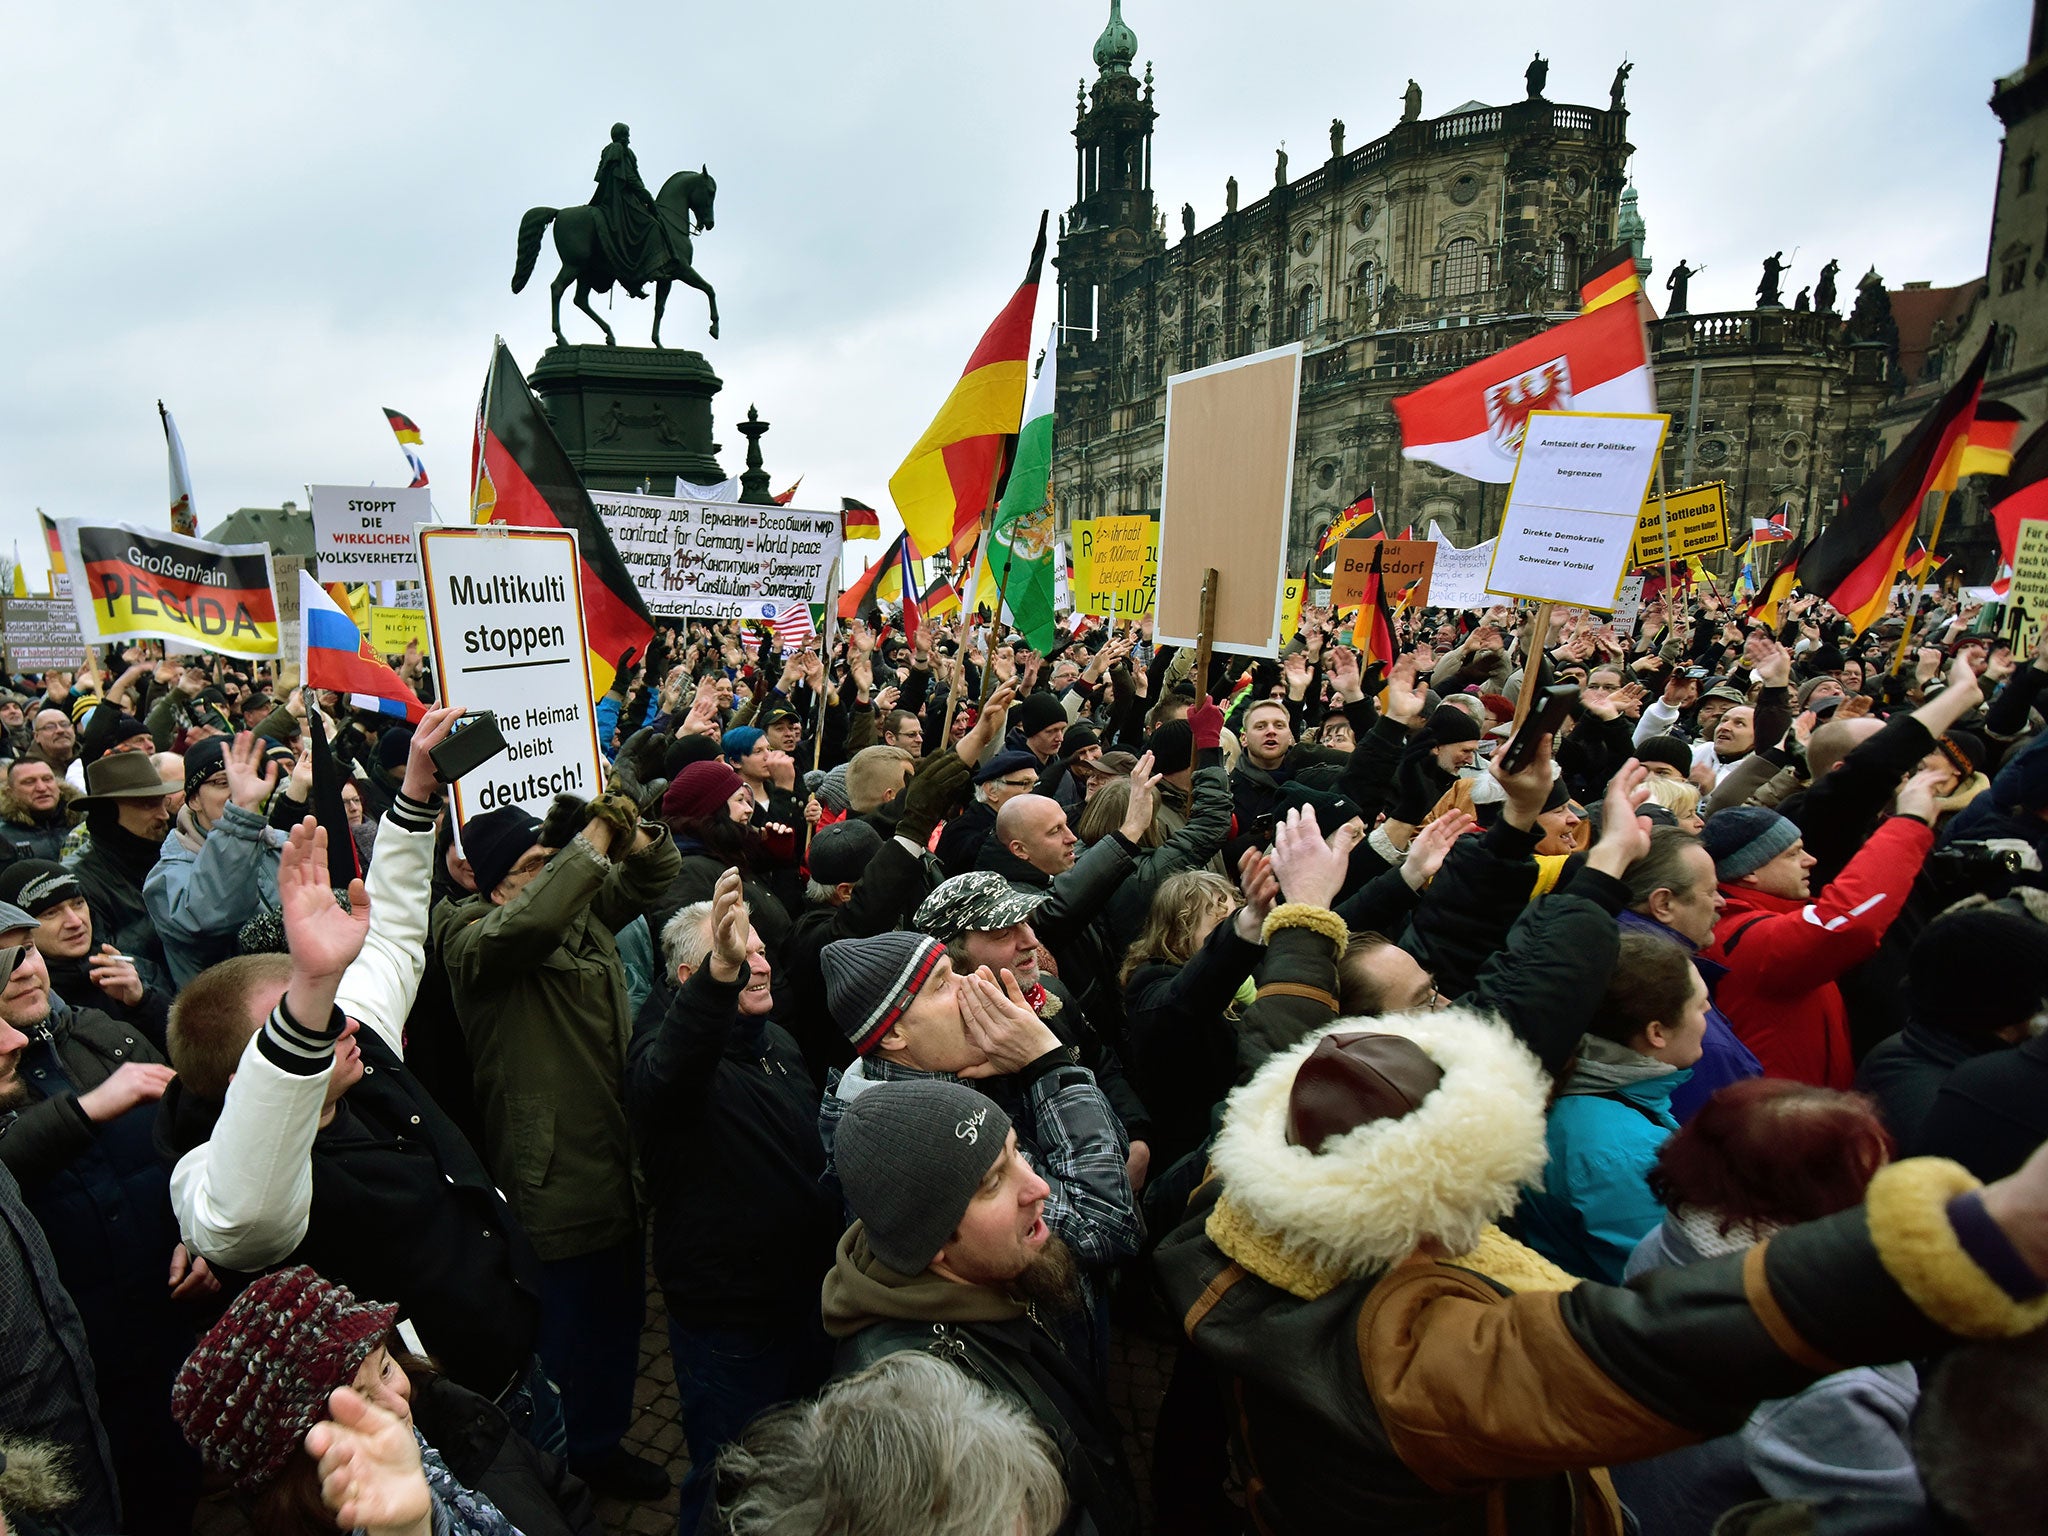 Supporters of the Pegida movement pictured during their weekly demonstration on January 25, 2015 in Dresden, Germany.